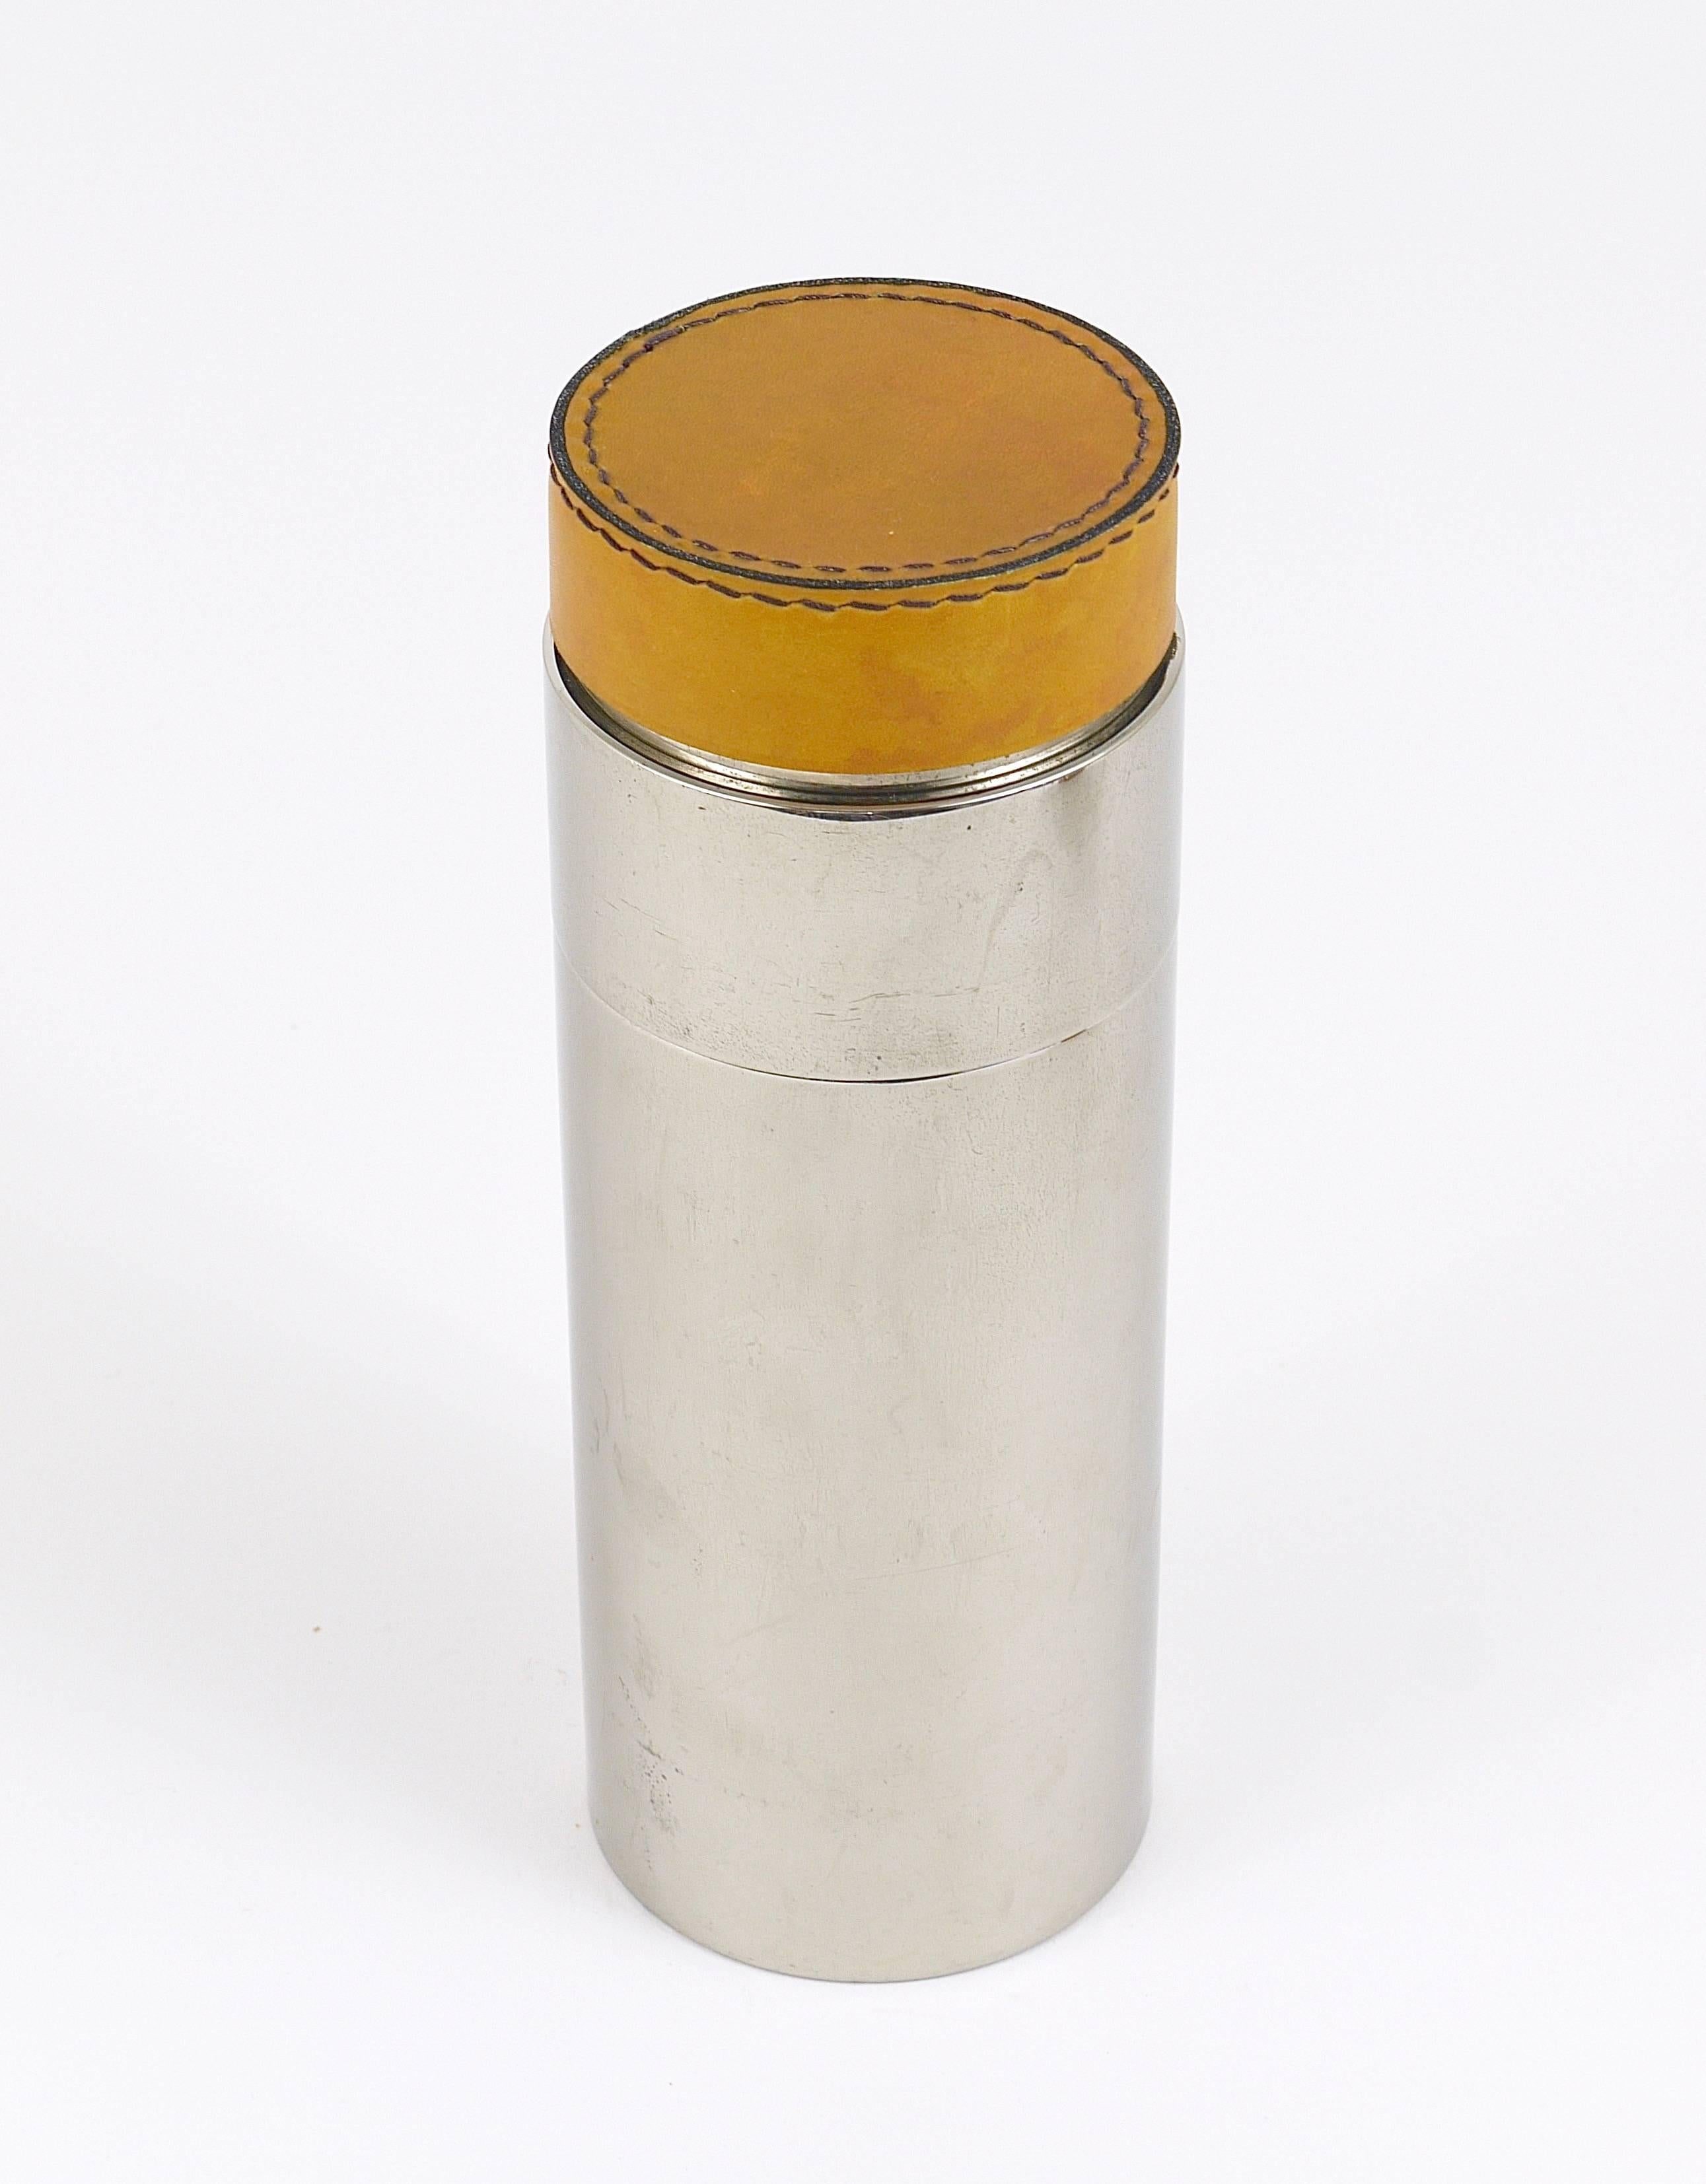 Carl Auböck Nickel-Plated Cocktail Shaker, Brass, Leather, Austria, 1950s 1